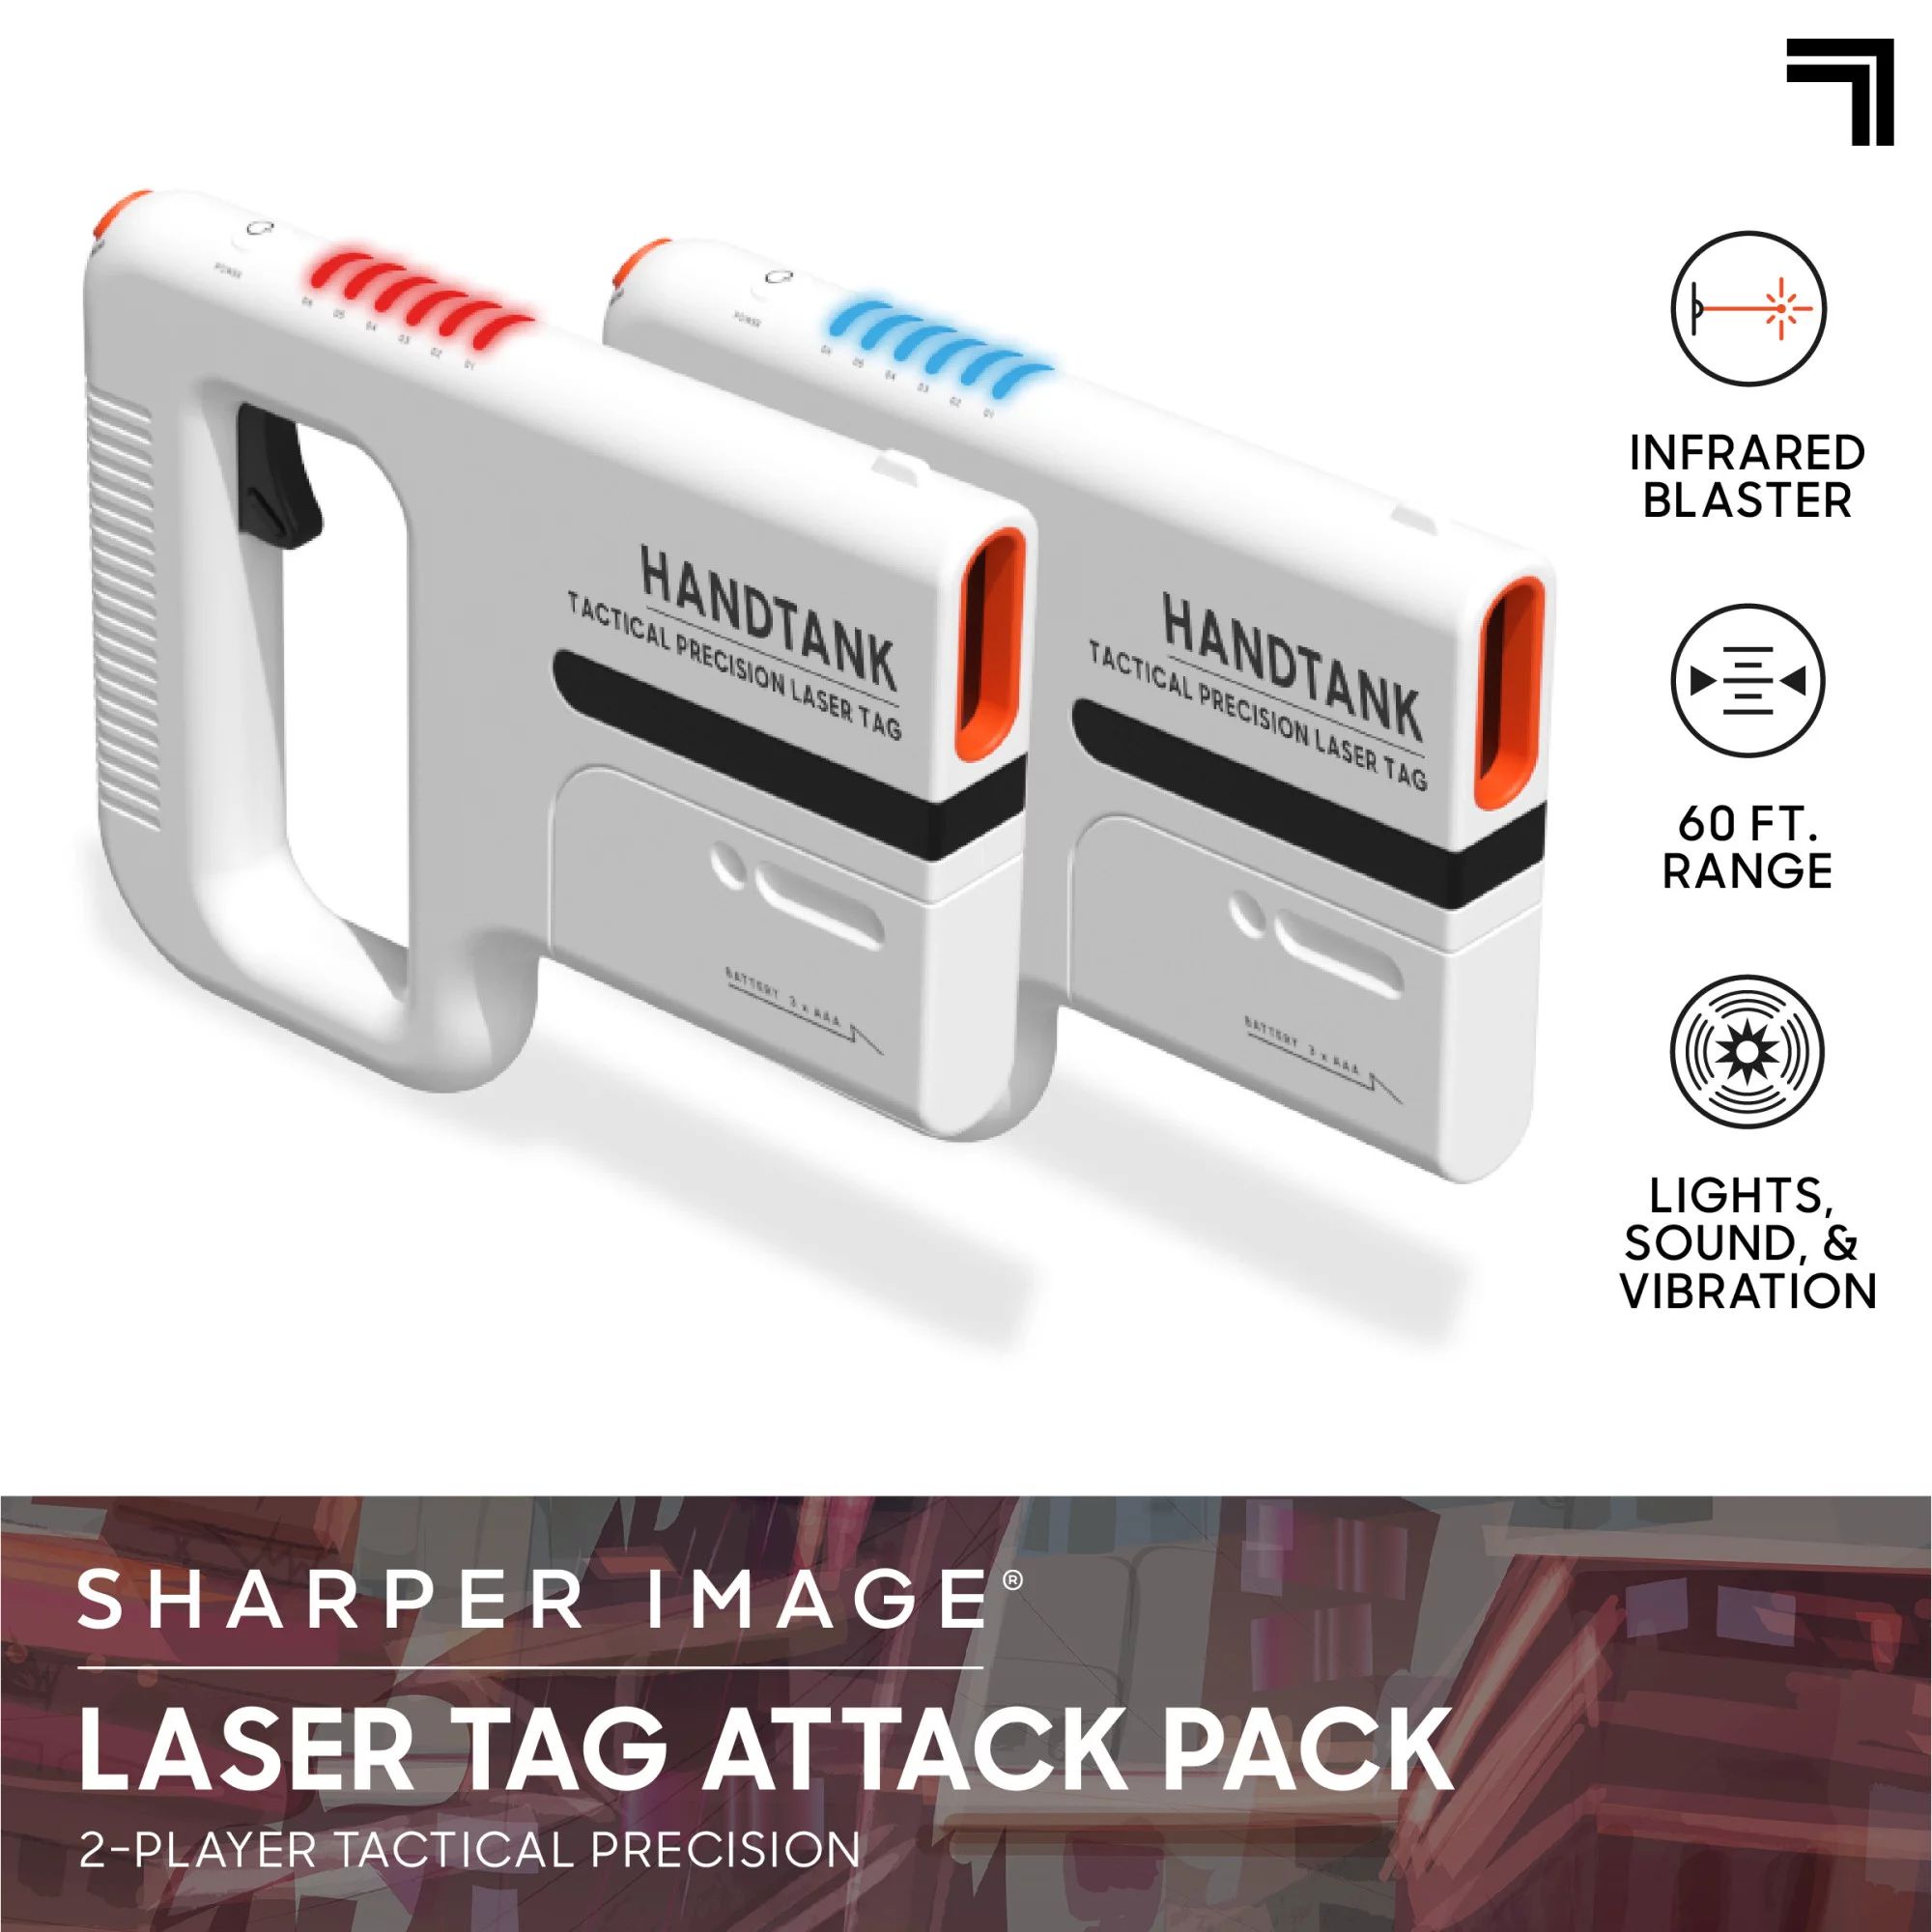 Sharper Image® Laser Tag Attack Pack 2-Player Tactical Precision with Compatible With Handtank L... | Walmart (US)